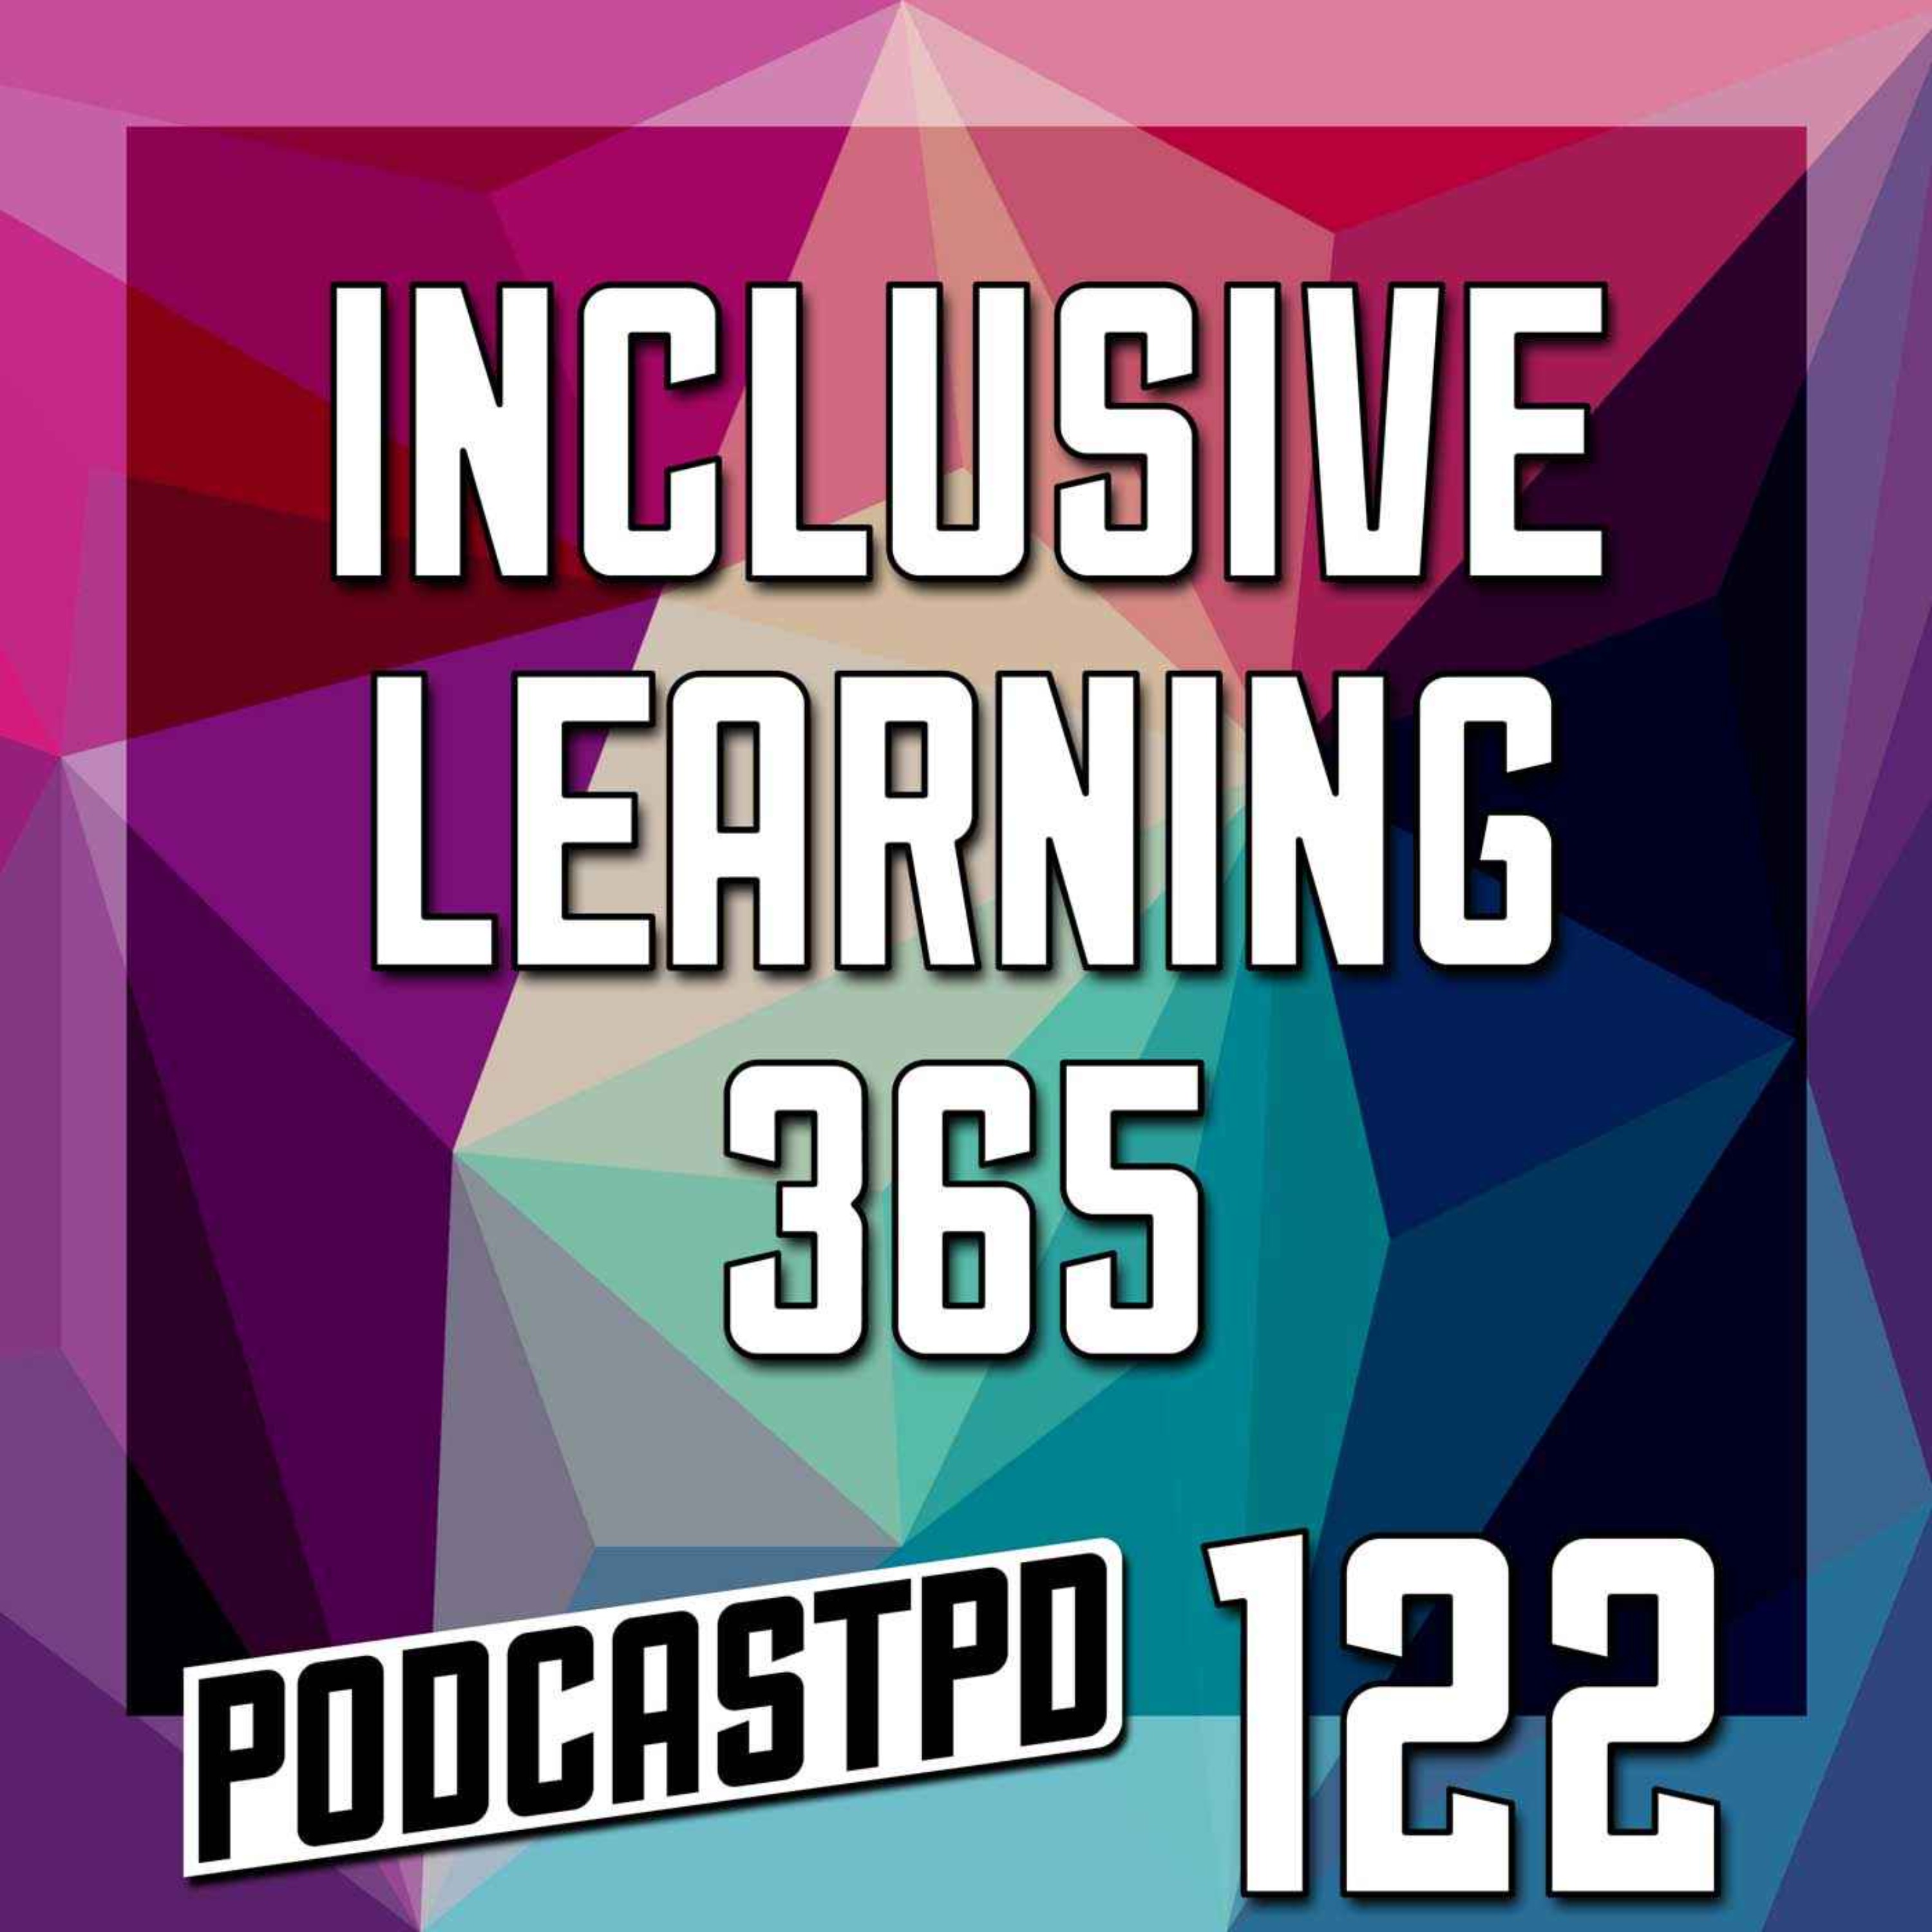 Inclusive Learning 365 - PPD122